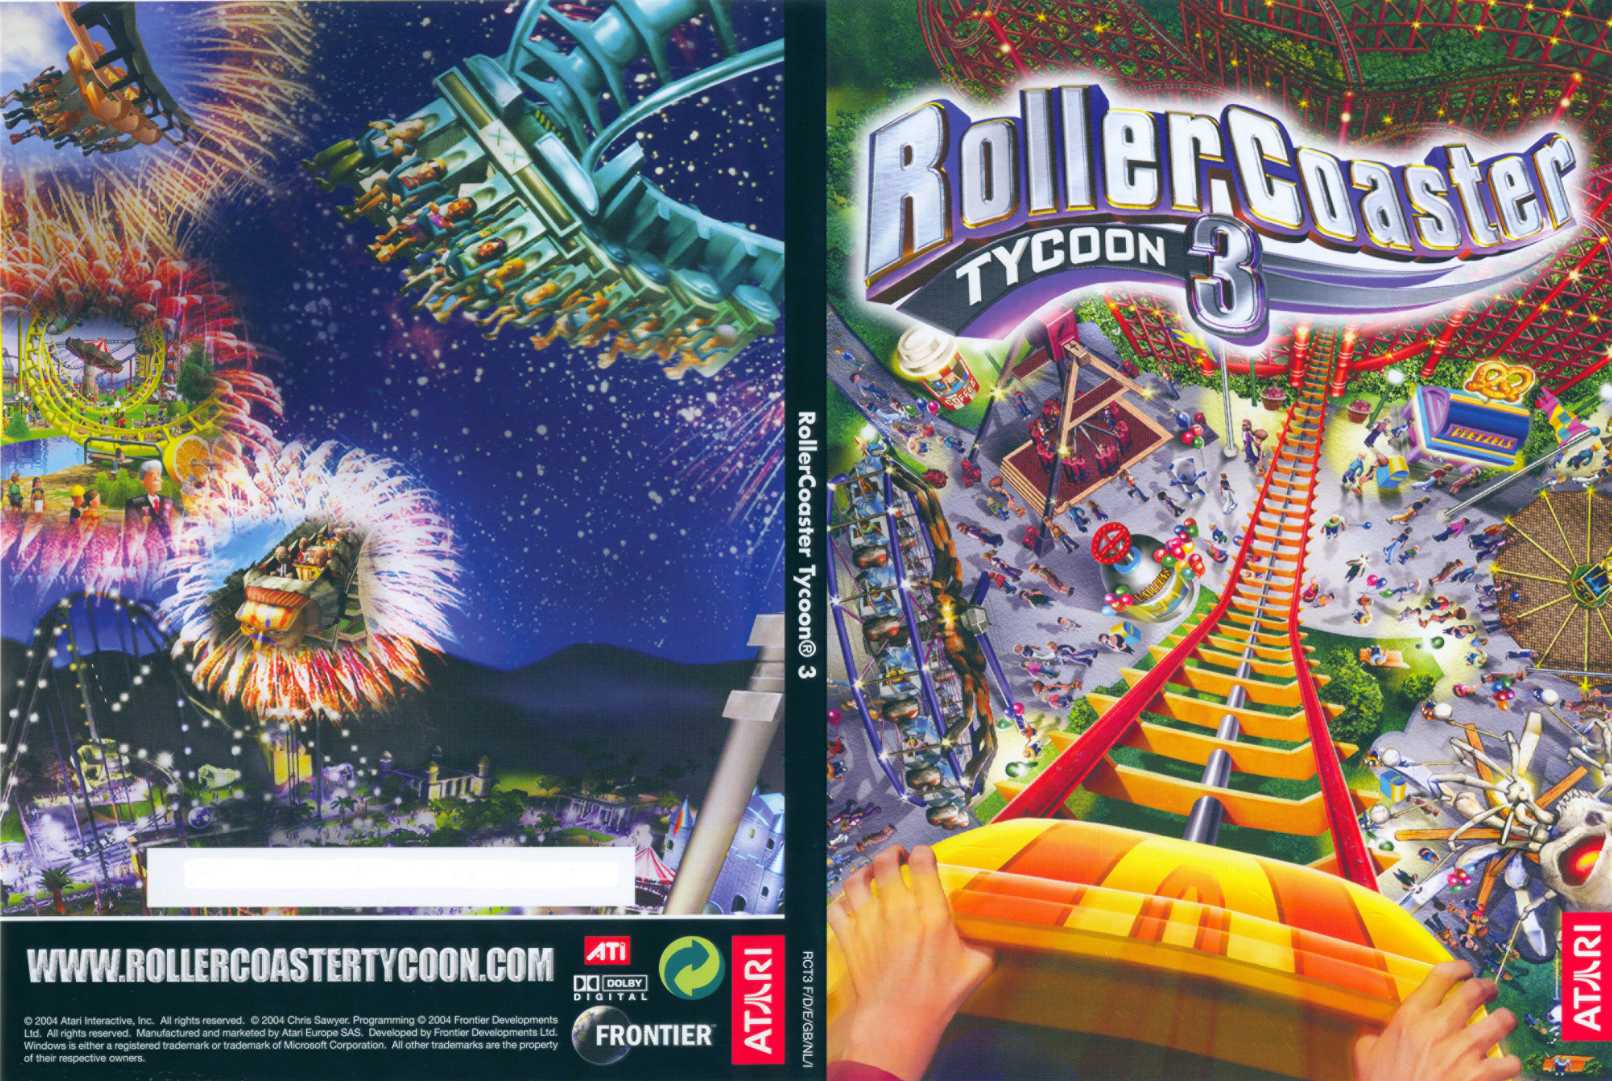 RollerCoaster Tycoon 3 - DVD obal